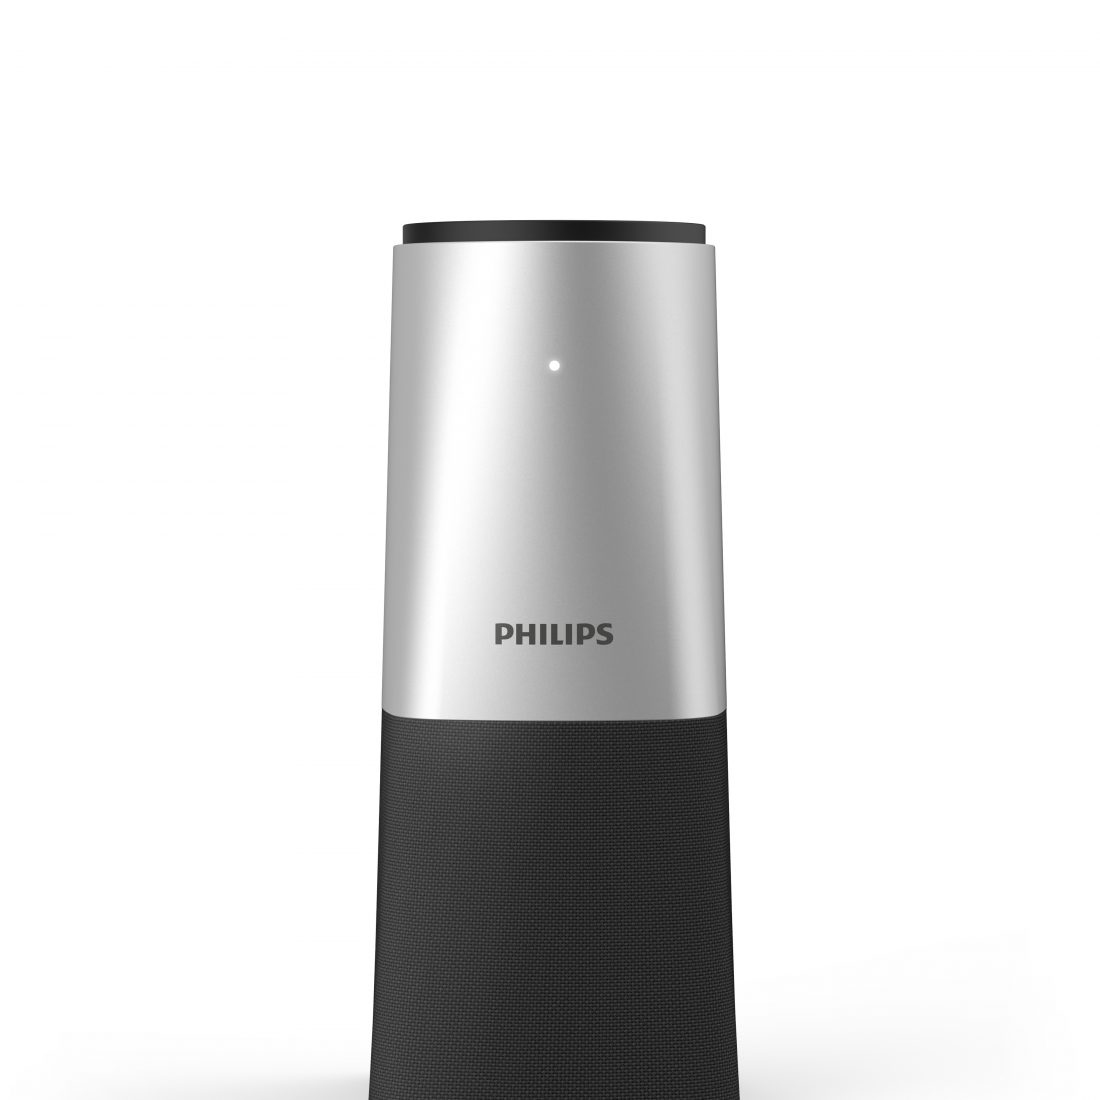 Philips SmartMeeting Portable Microphone